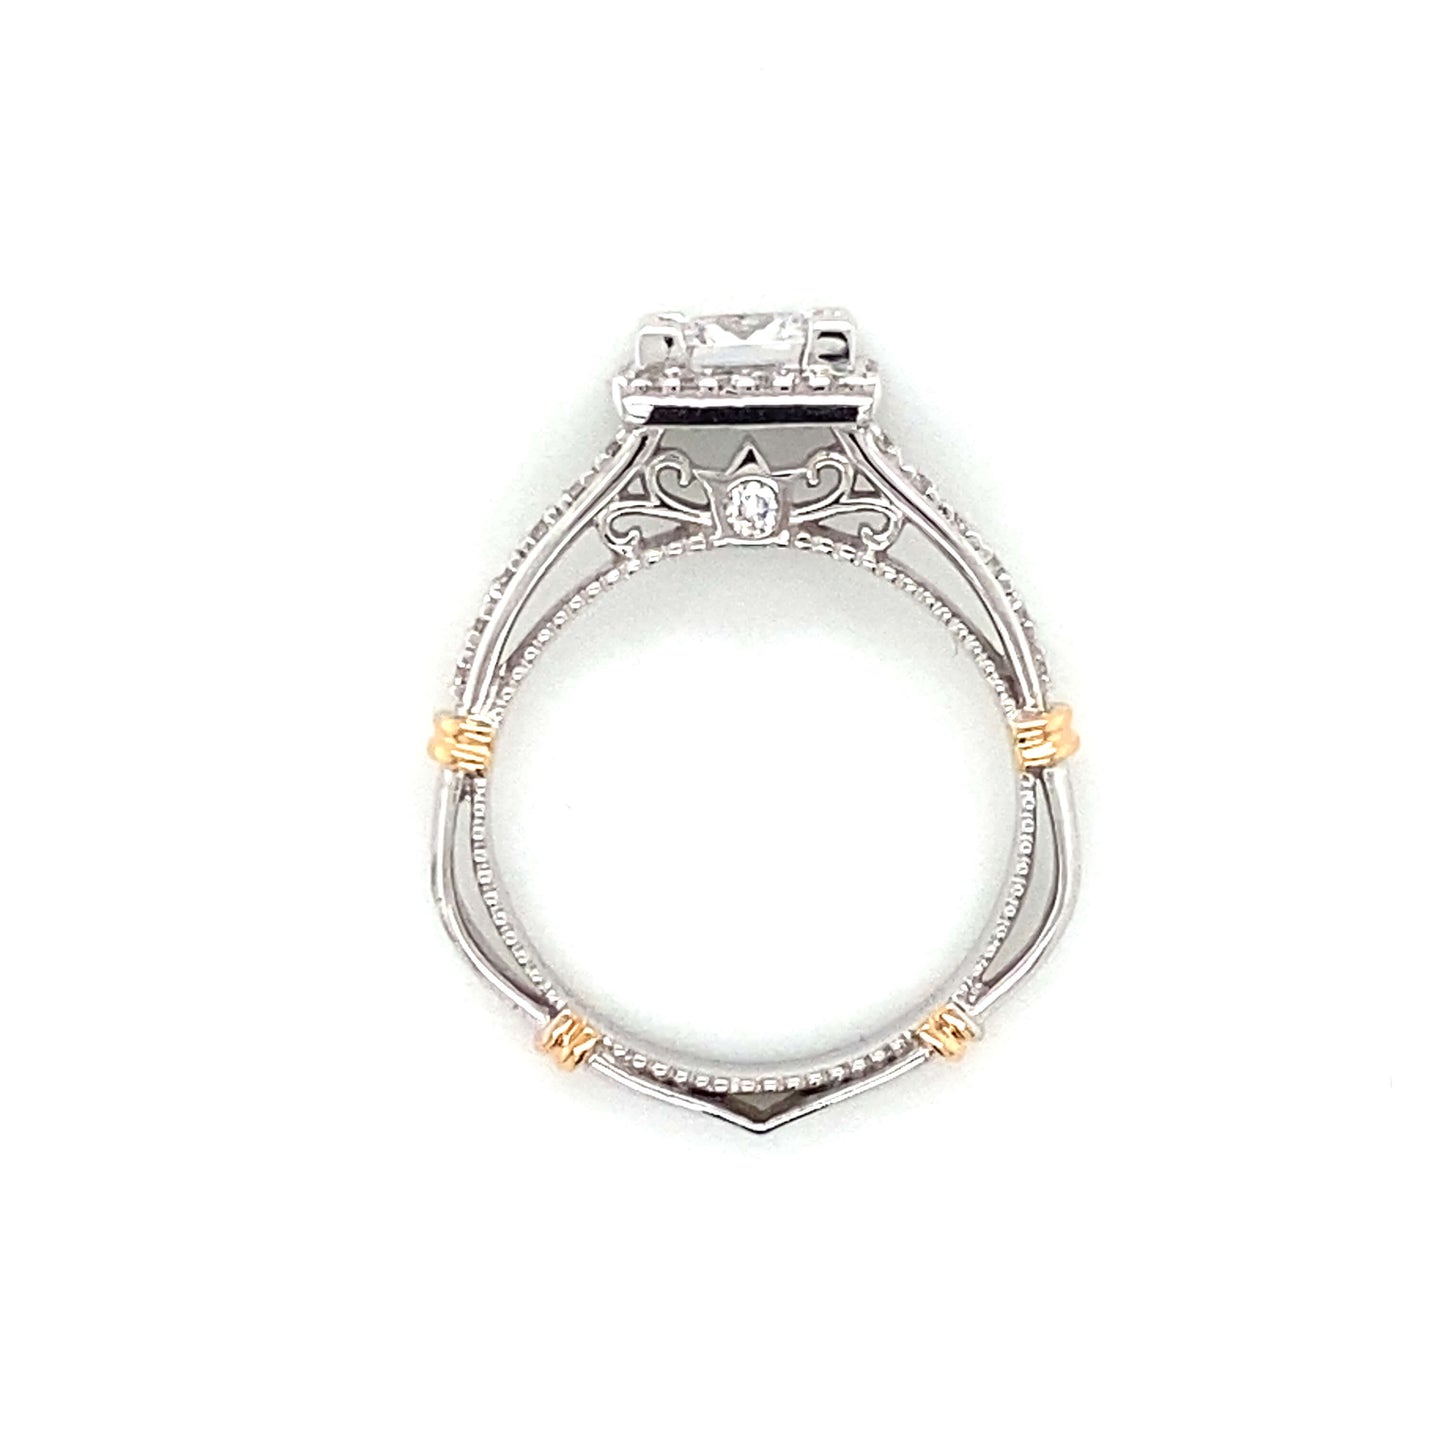 Verragio Square Halo Pave Engagement Ring in 18K White & Rose Gold